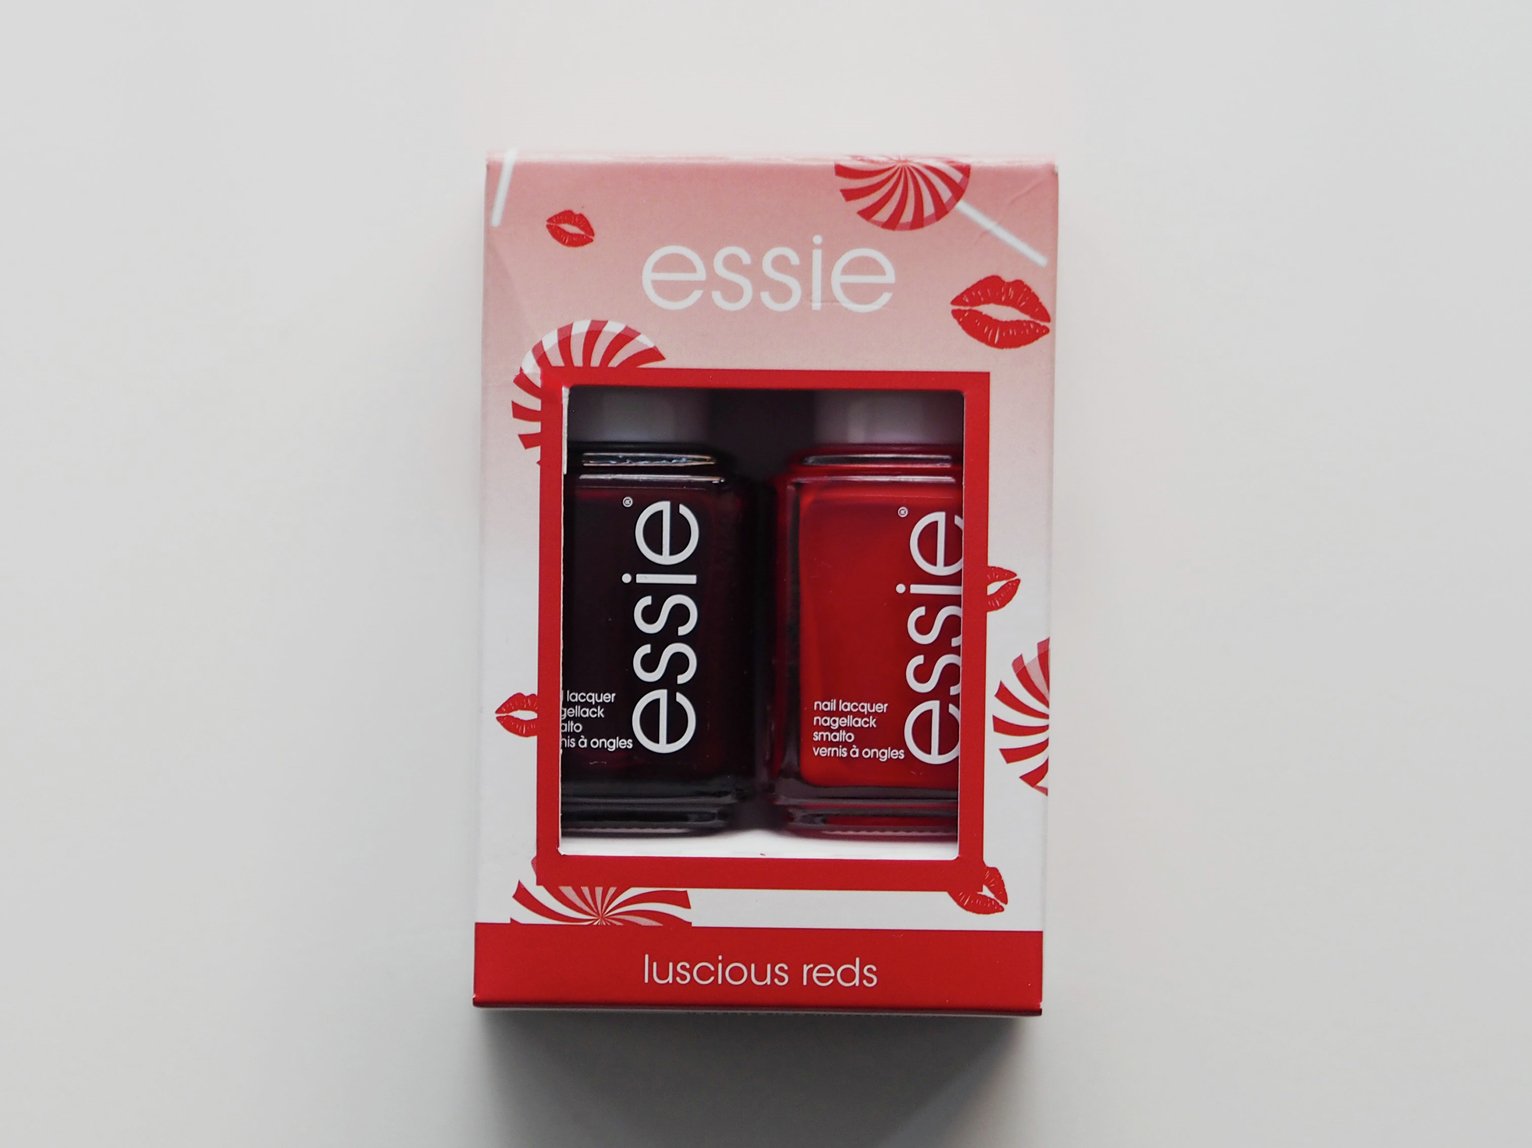 Essie Red Duo review